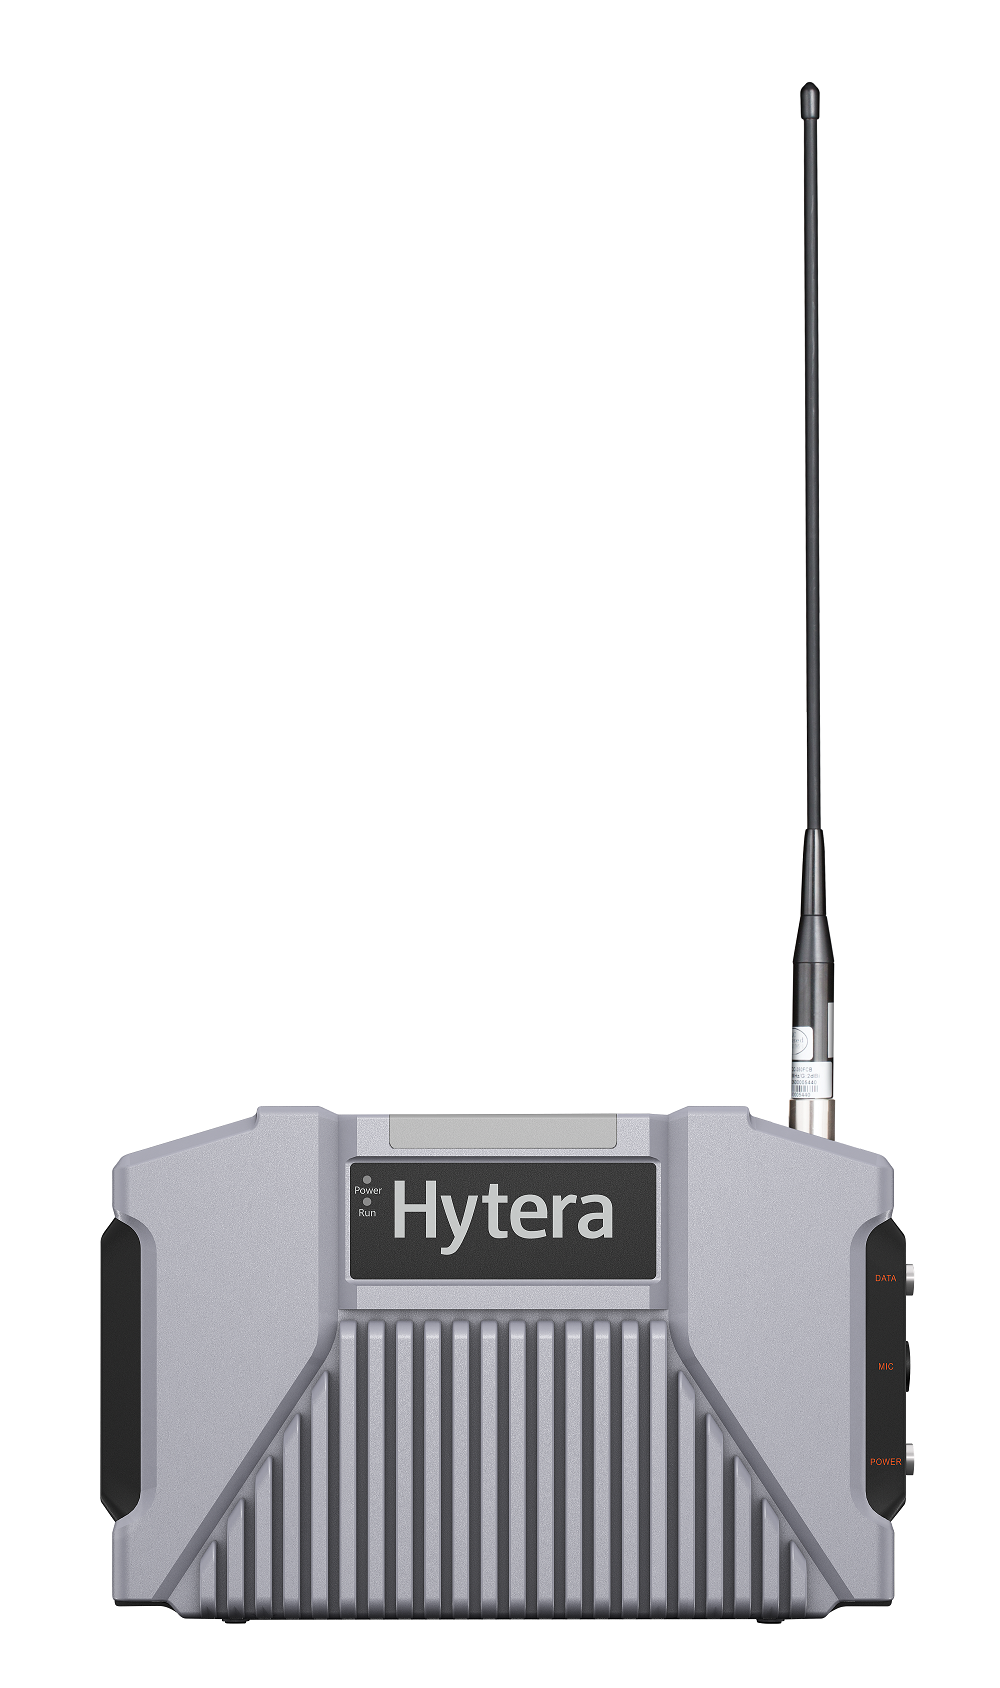 Hytera Emergency Communication Solution for Earthquake Rescue